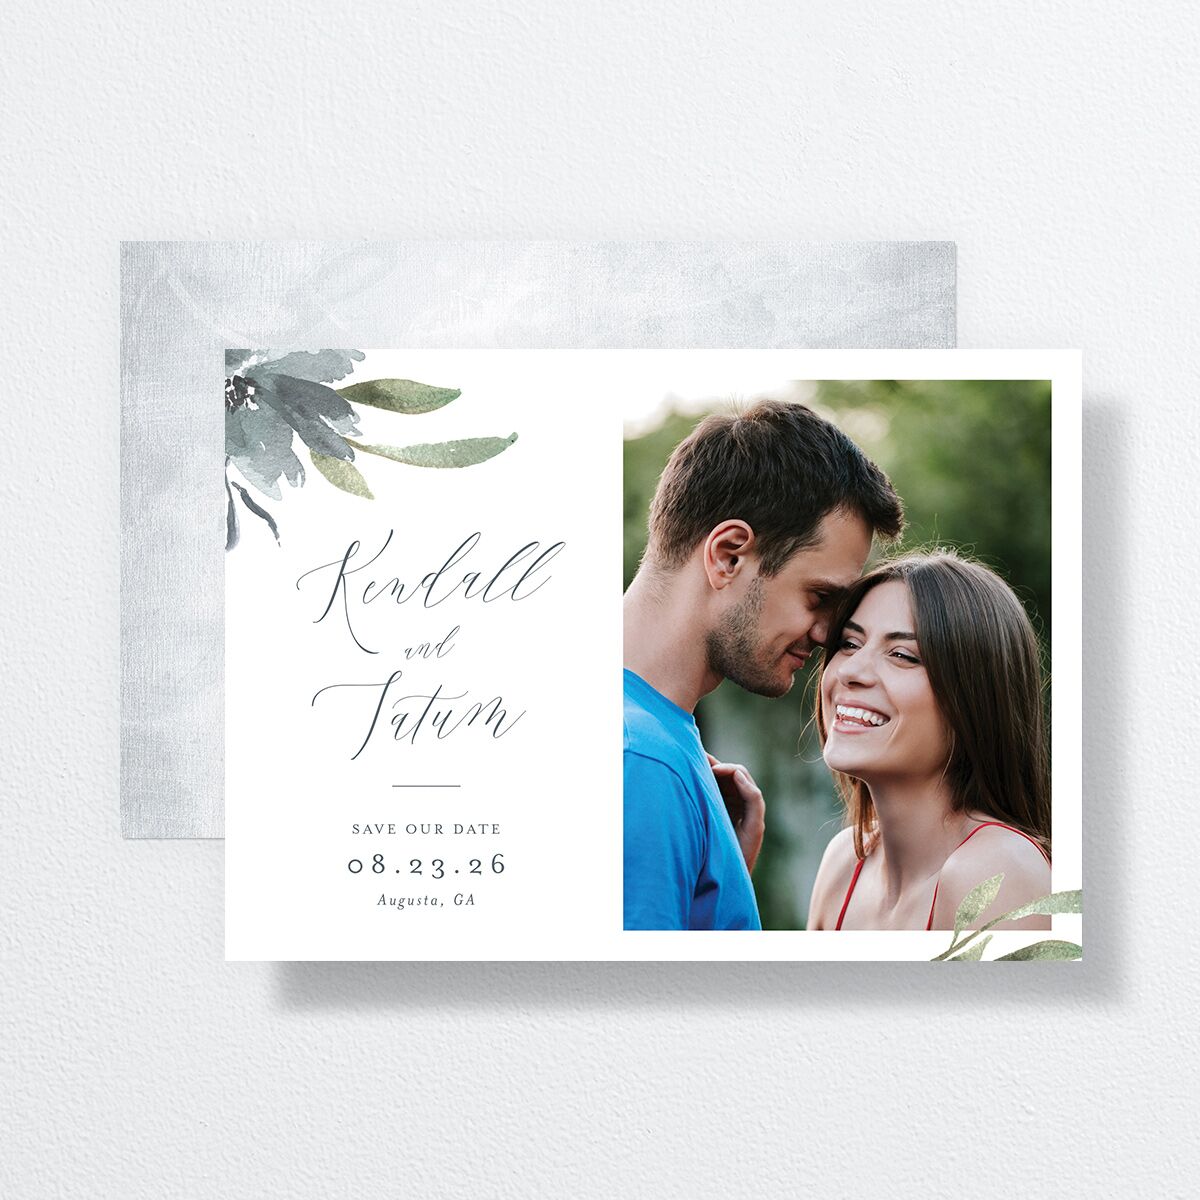 Muted Floral Save The Date Cards front-and-back in blue